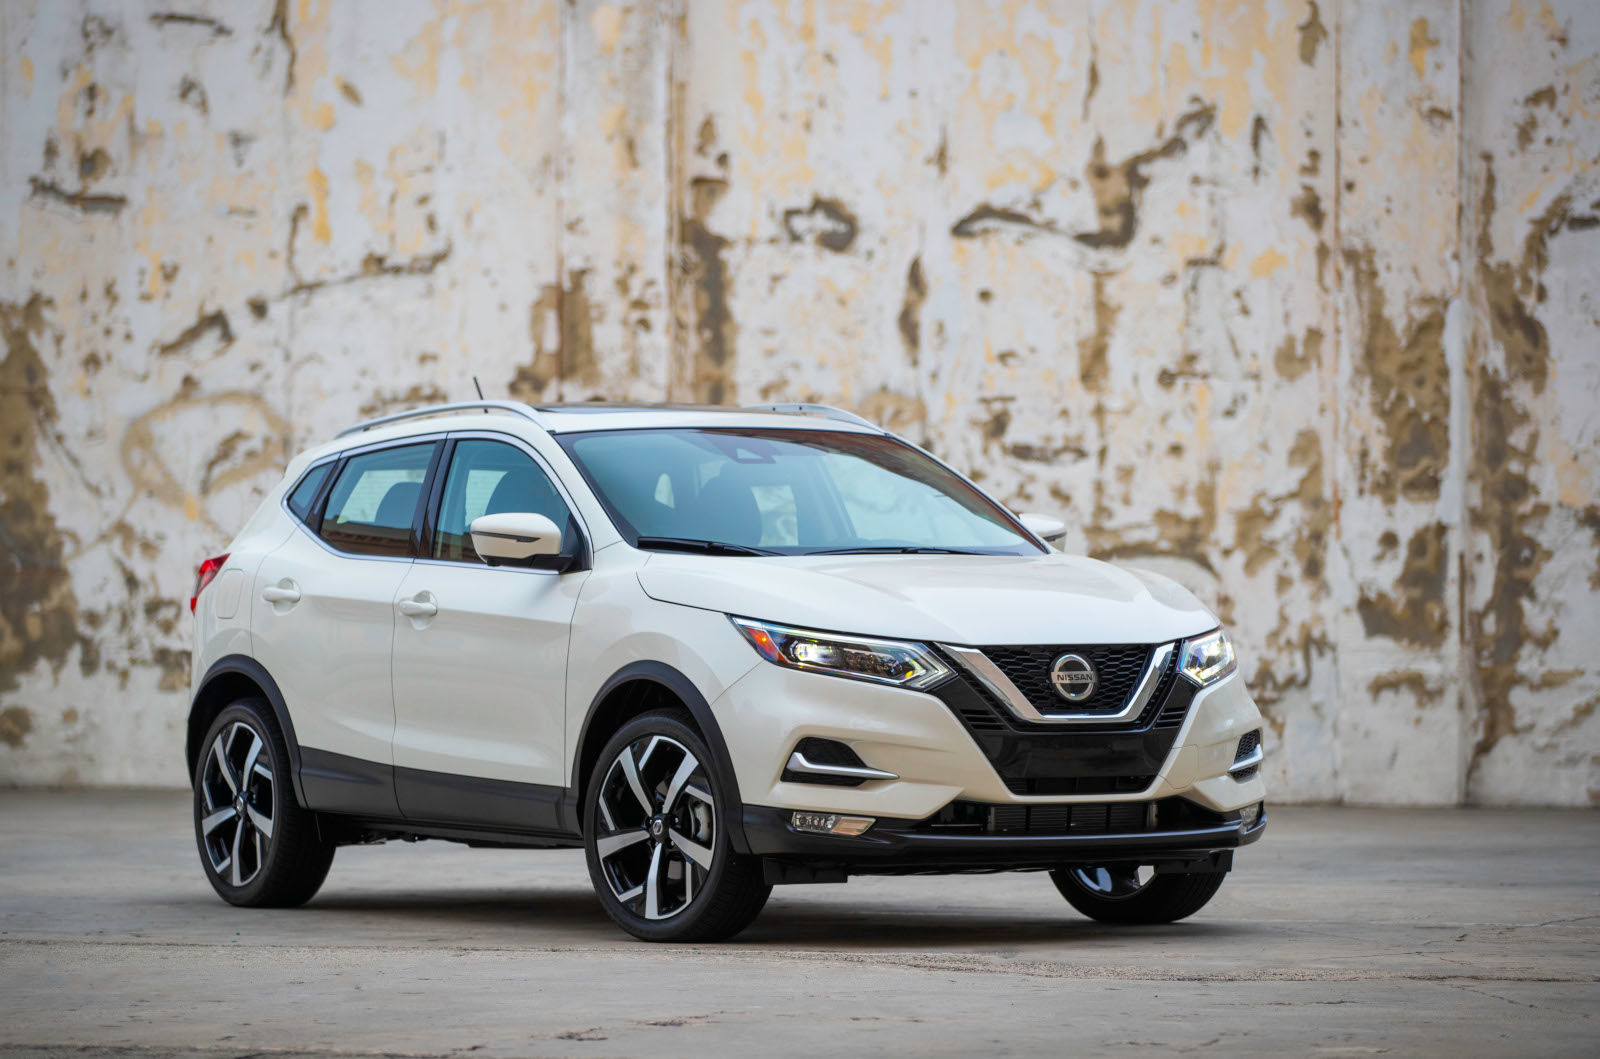 What makes the Nissan Qashqai stand out from its competitors?